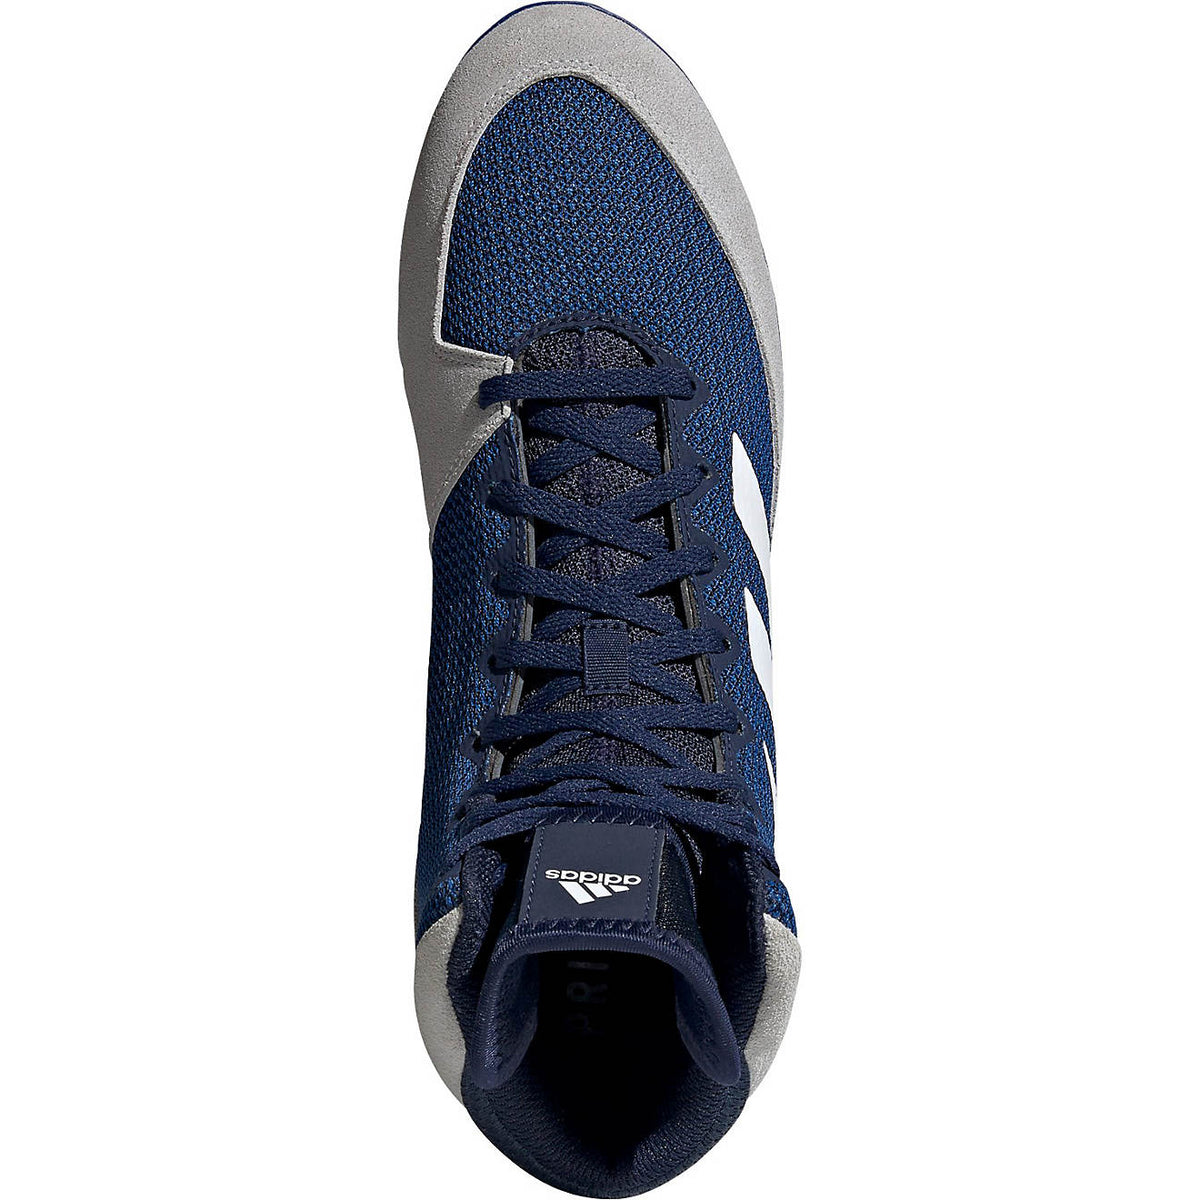 Adidas 232 Mat Wizard 5 Wrestling Shoes - Navy Gray White